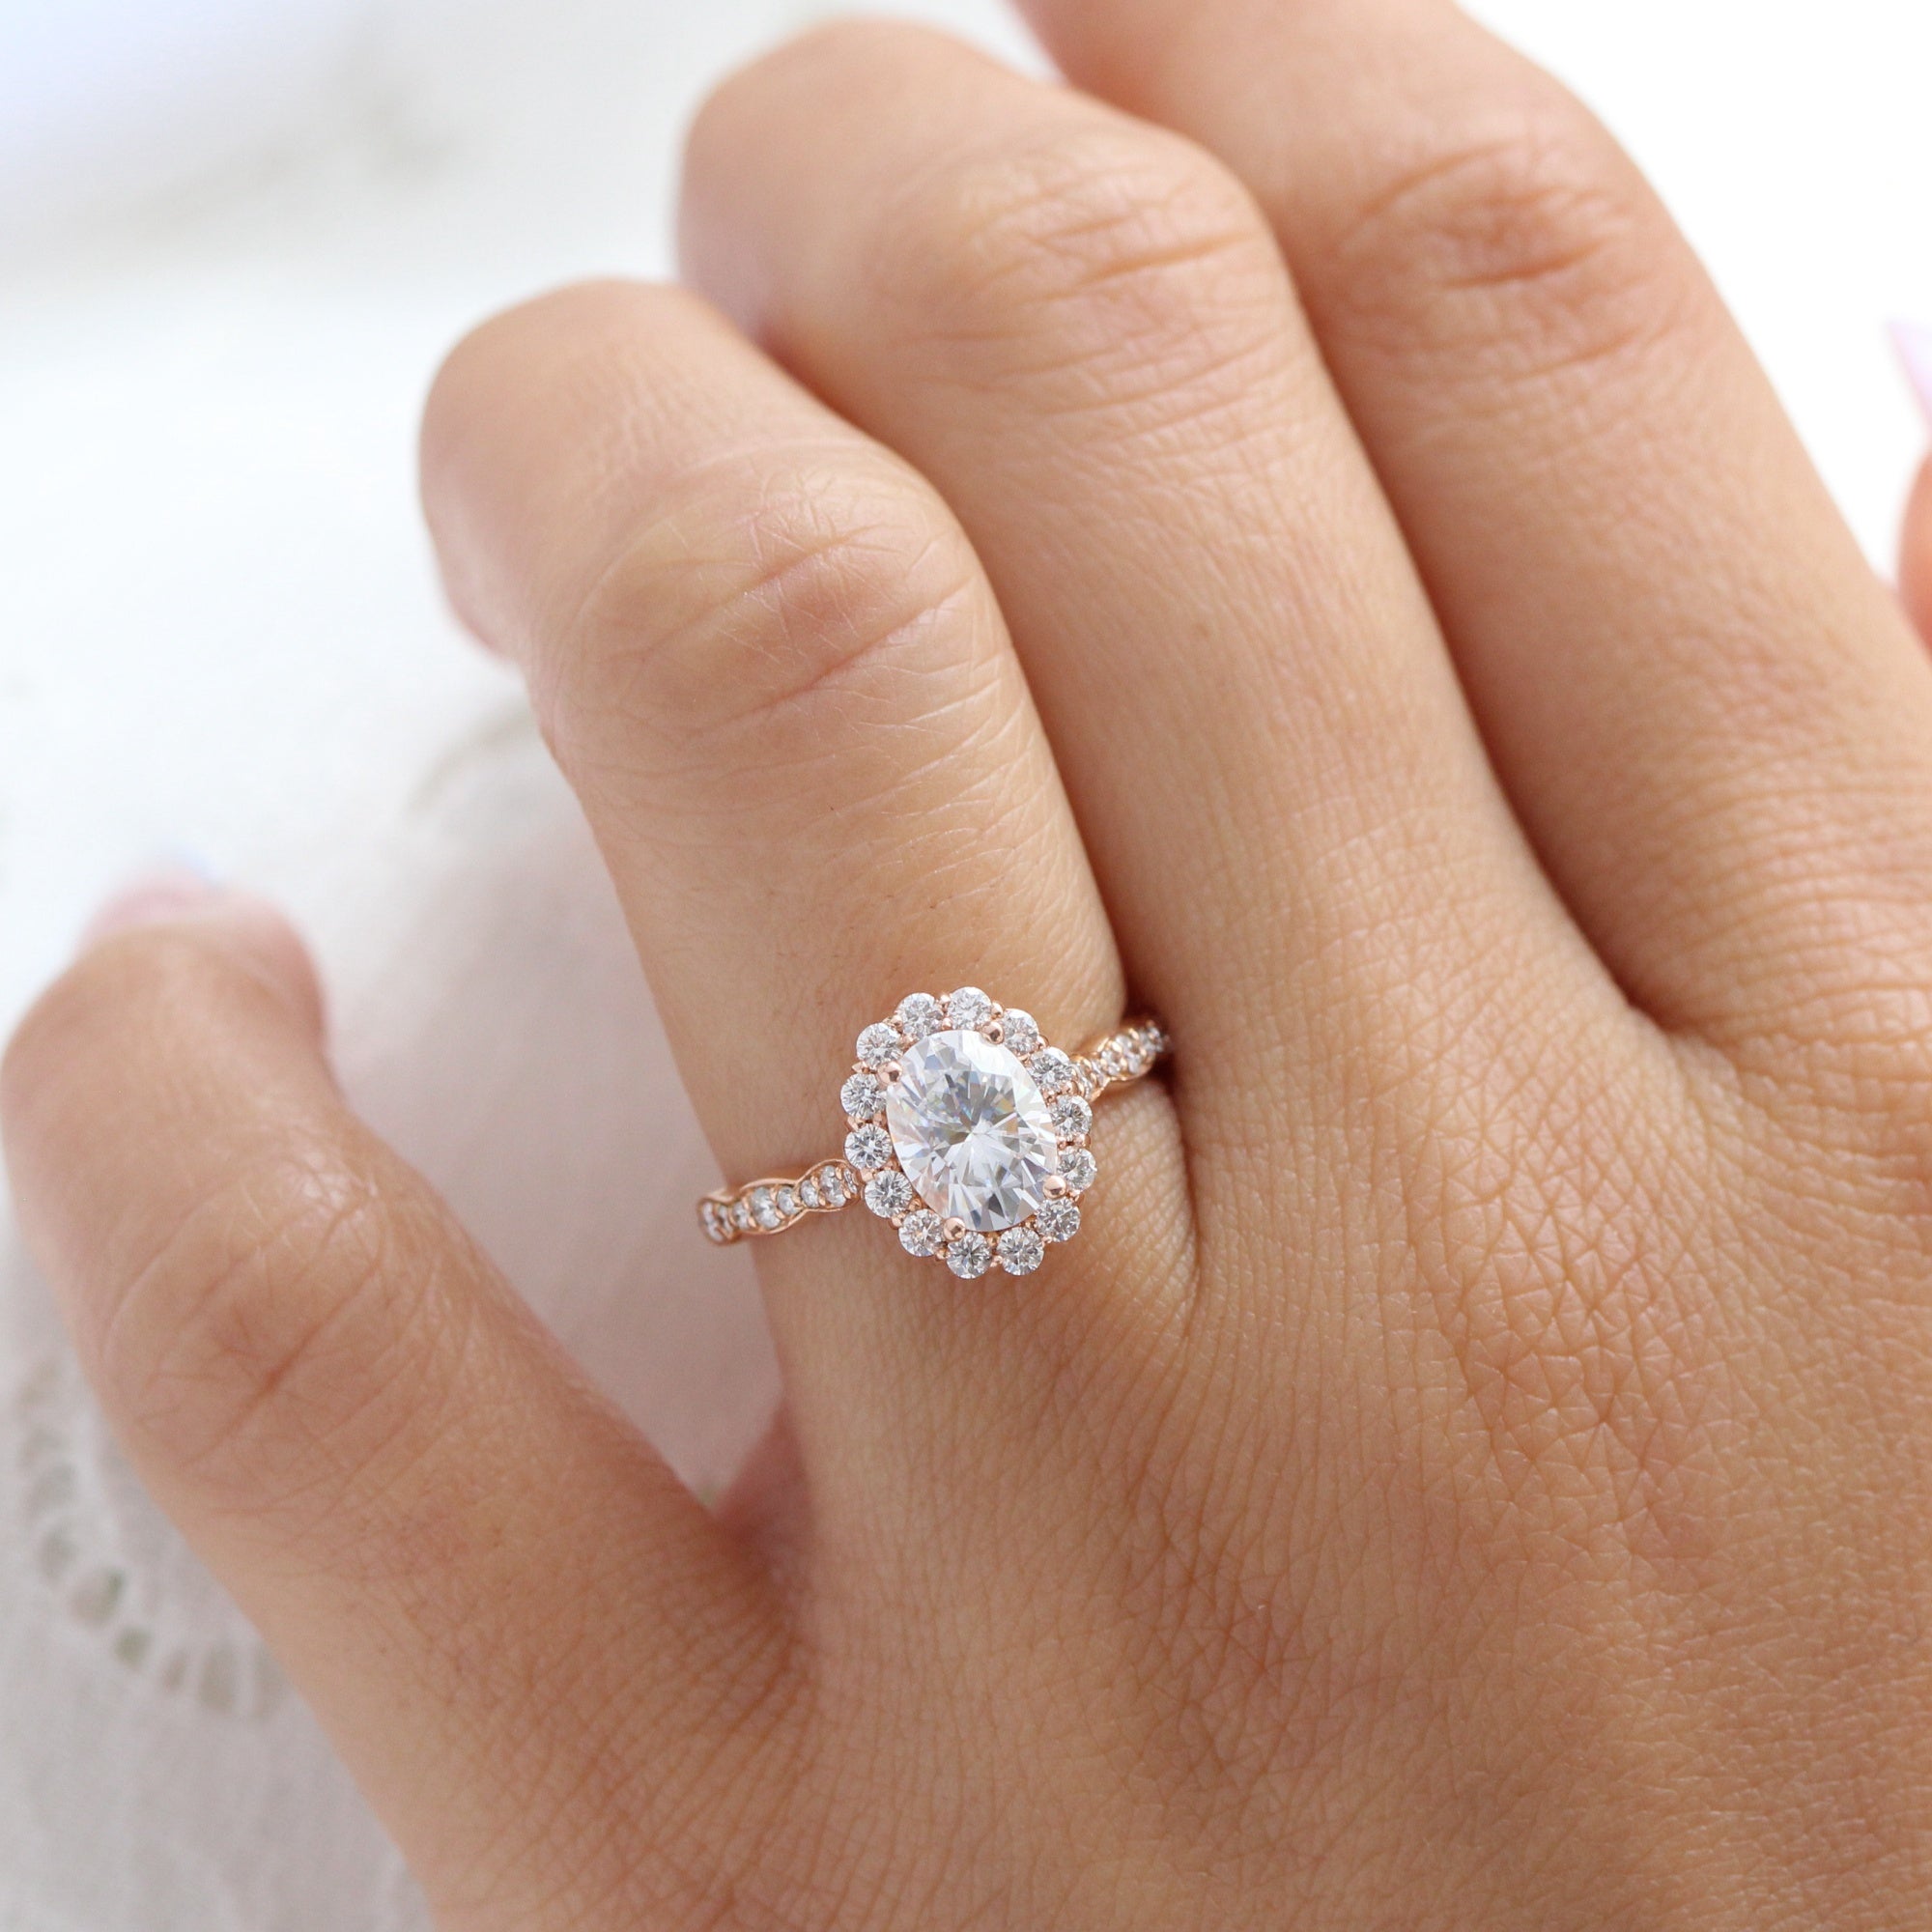 Luna Halo Oval Engagement Ring w/ Moissanite and Diamond in Scalloped Band